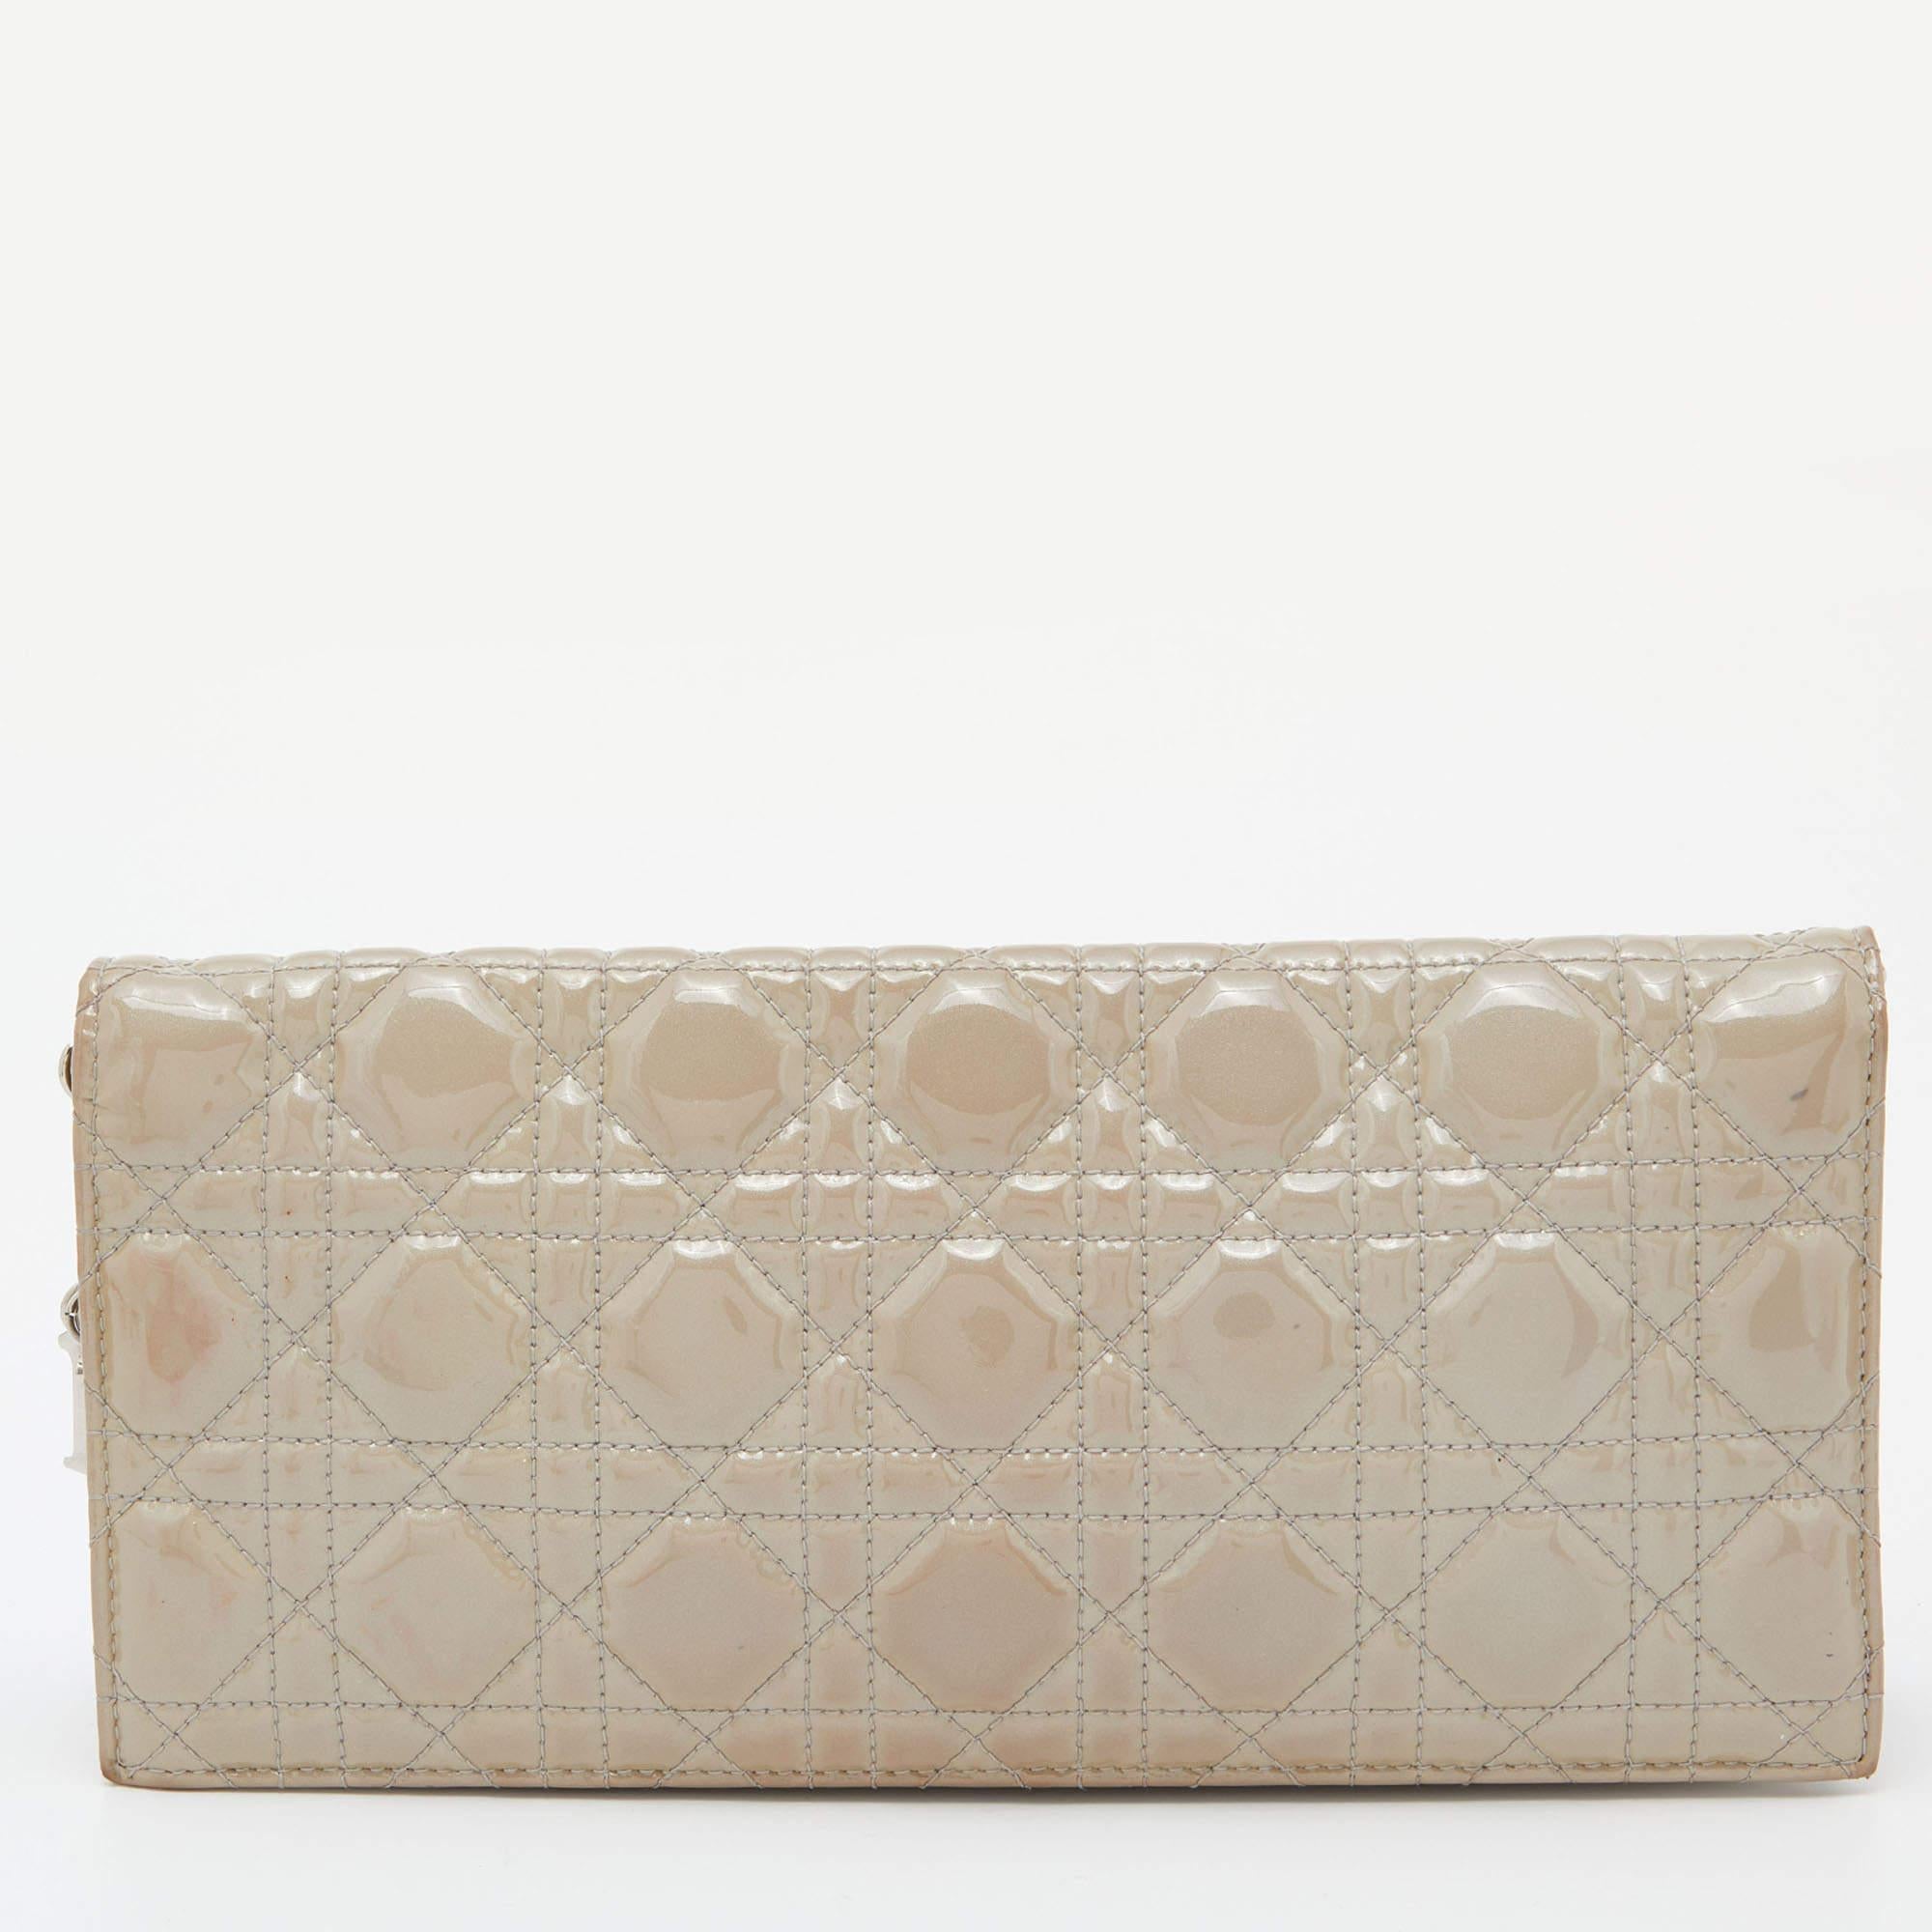 This Lady Dior clutch is a coveted creation that every fashionista craves to possess. This grey beauty has been crafted from patent leather and it carries the signature Cannage pattern. It is equipped with a nylon interior and complete with dangling